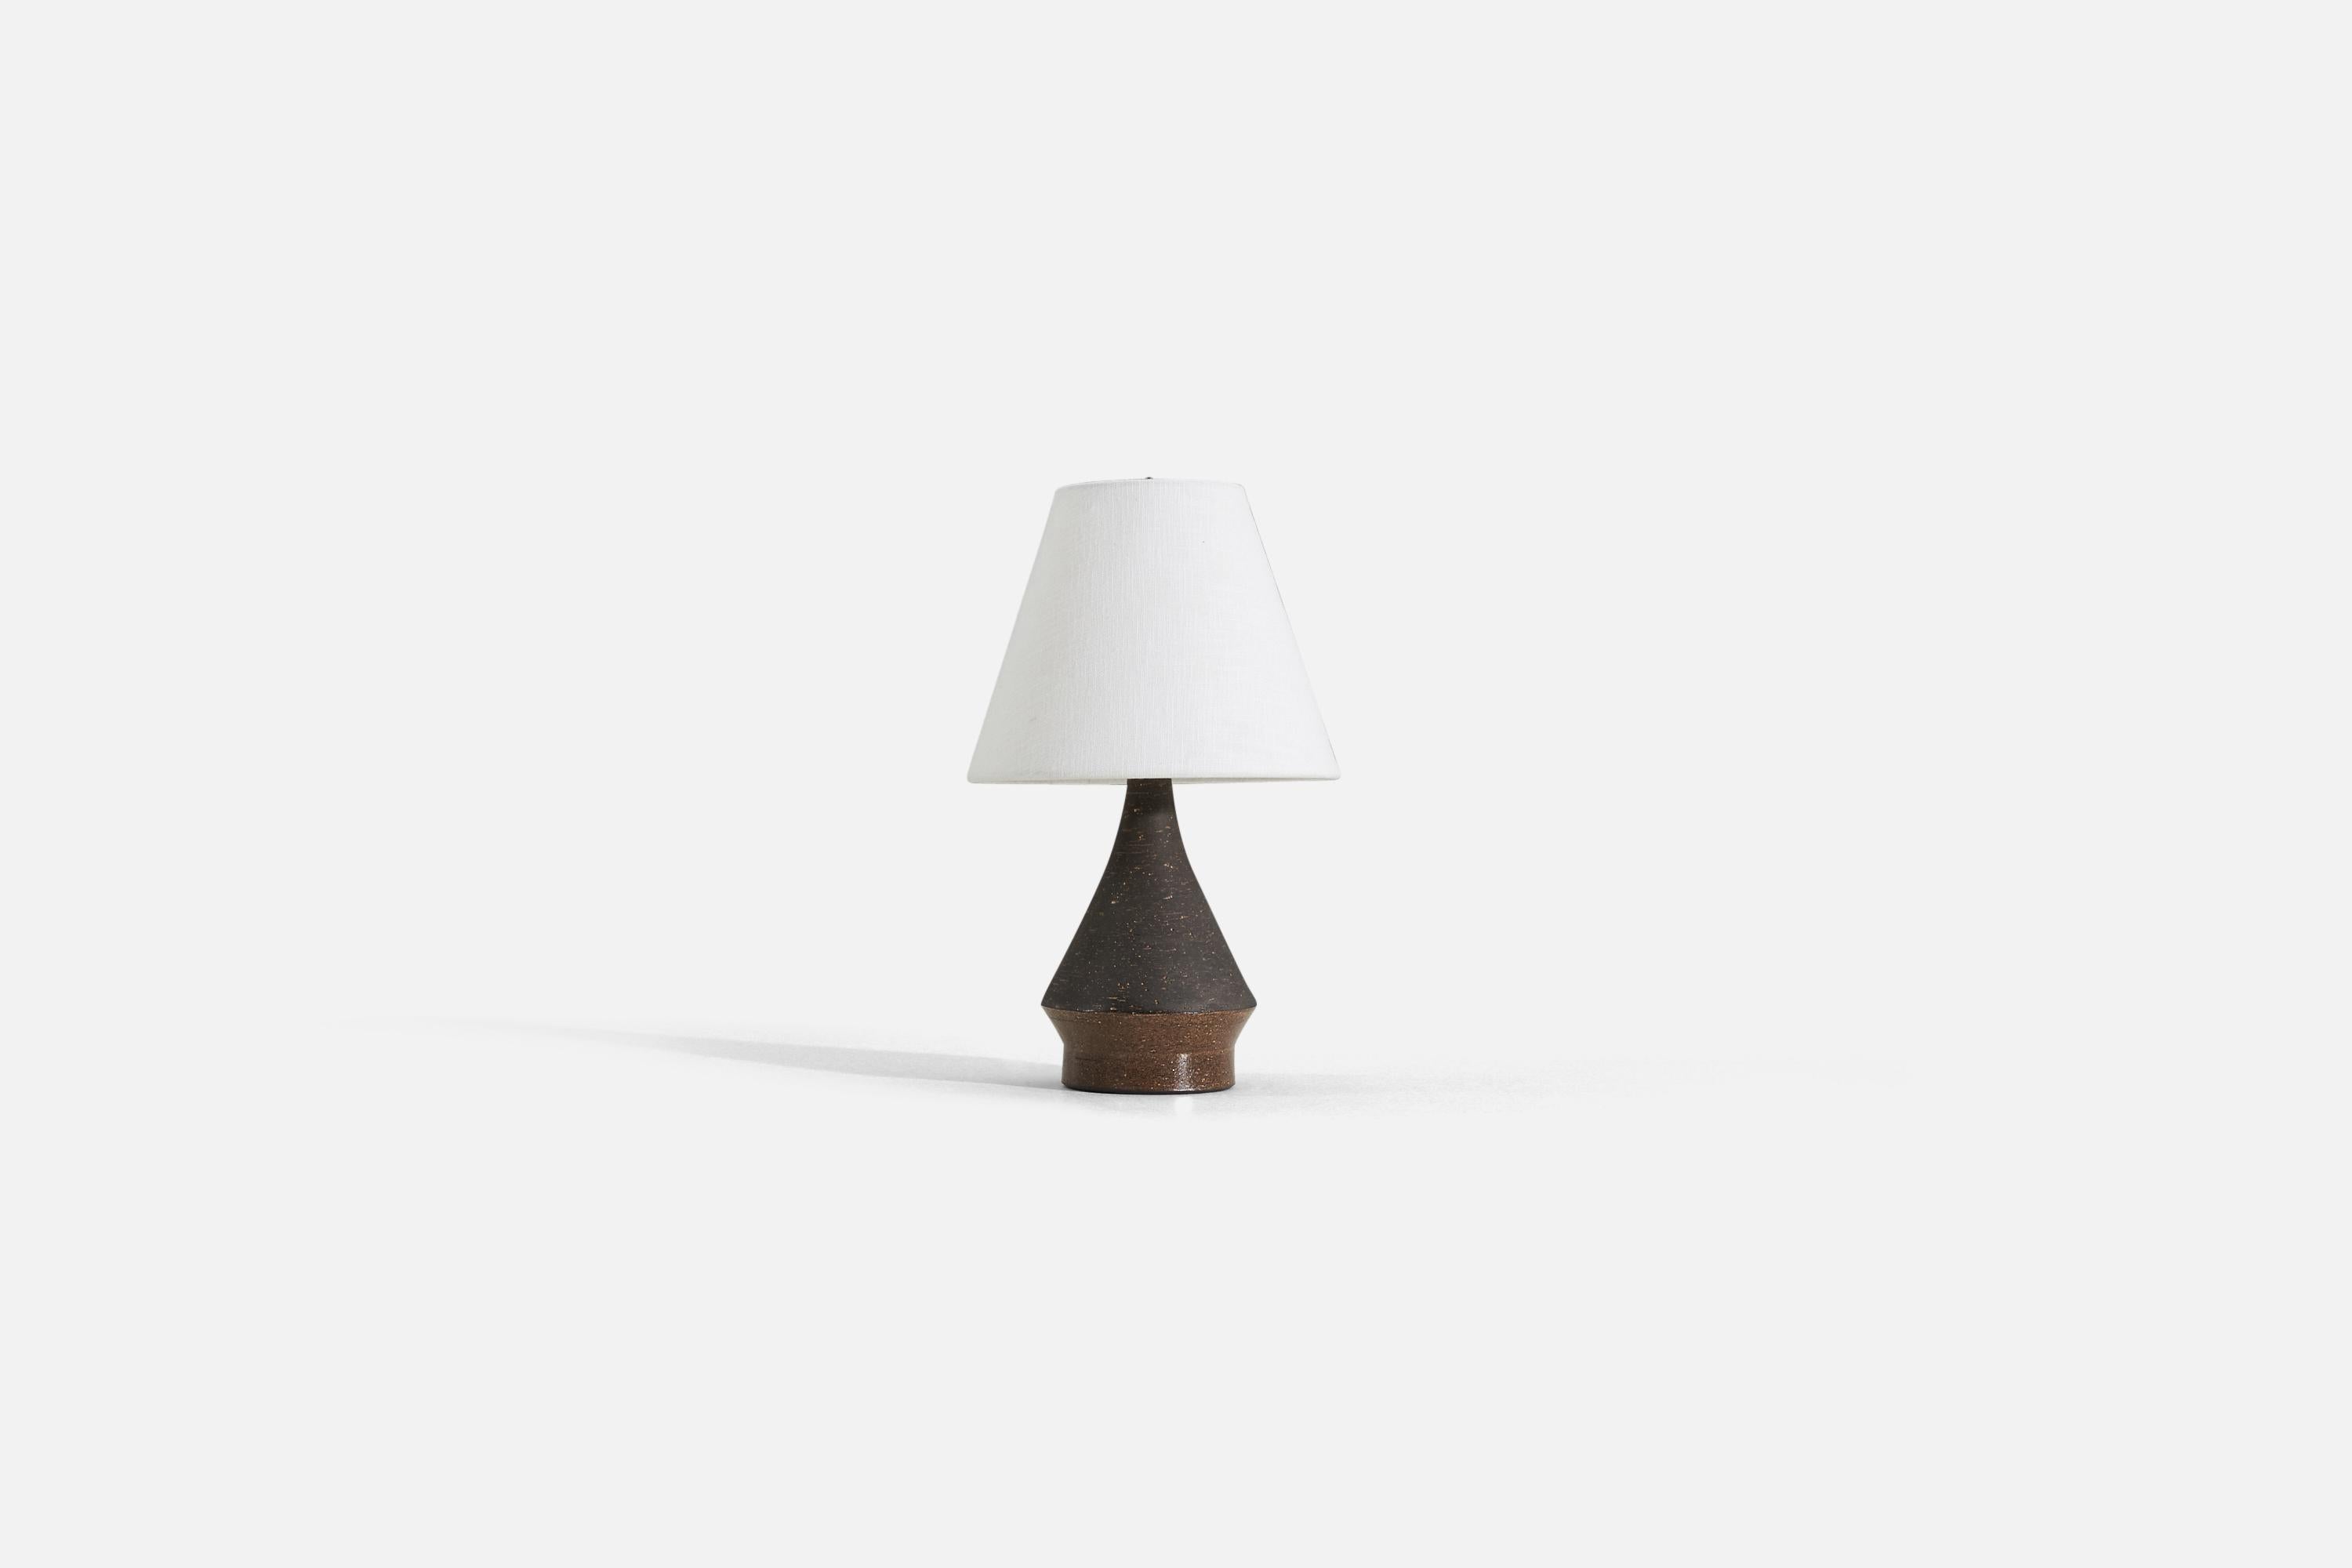 A brown glazed table lamp produced by Svensk form, designed by Bo Bergström.

Lampshade attached for illustration and is not included in purchase. Dimensions stated are without lampshade.
Measurements listed are of lamp.
Shade : 4 x 8 x